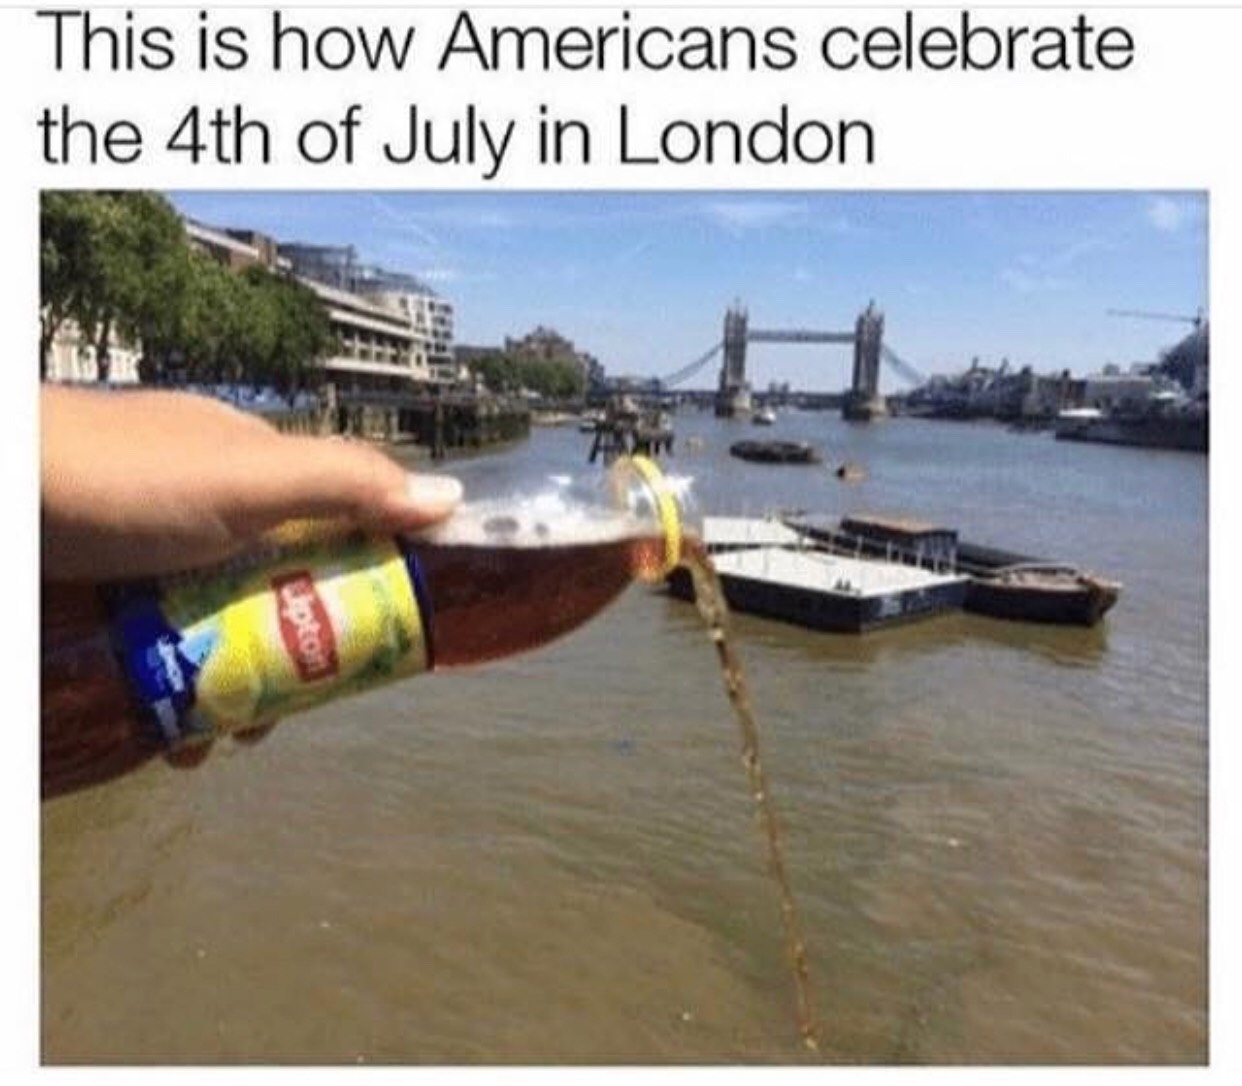 london - This is how Americans celebrate the 4th of July in London